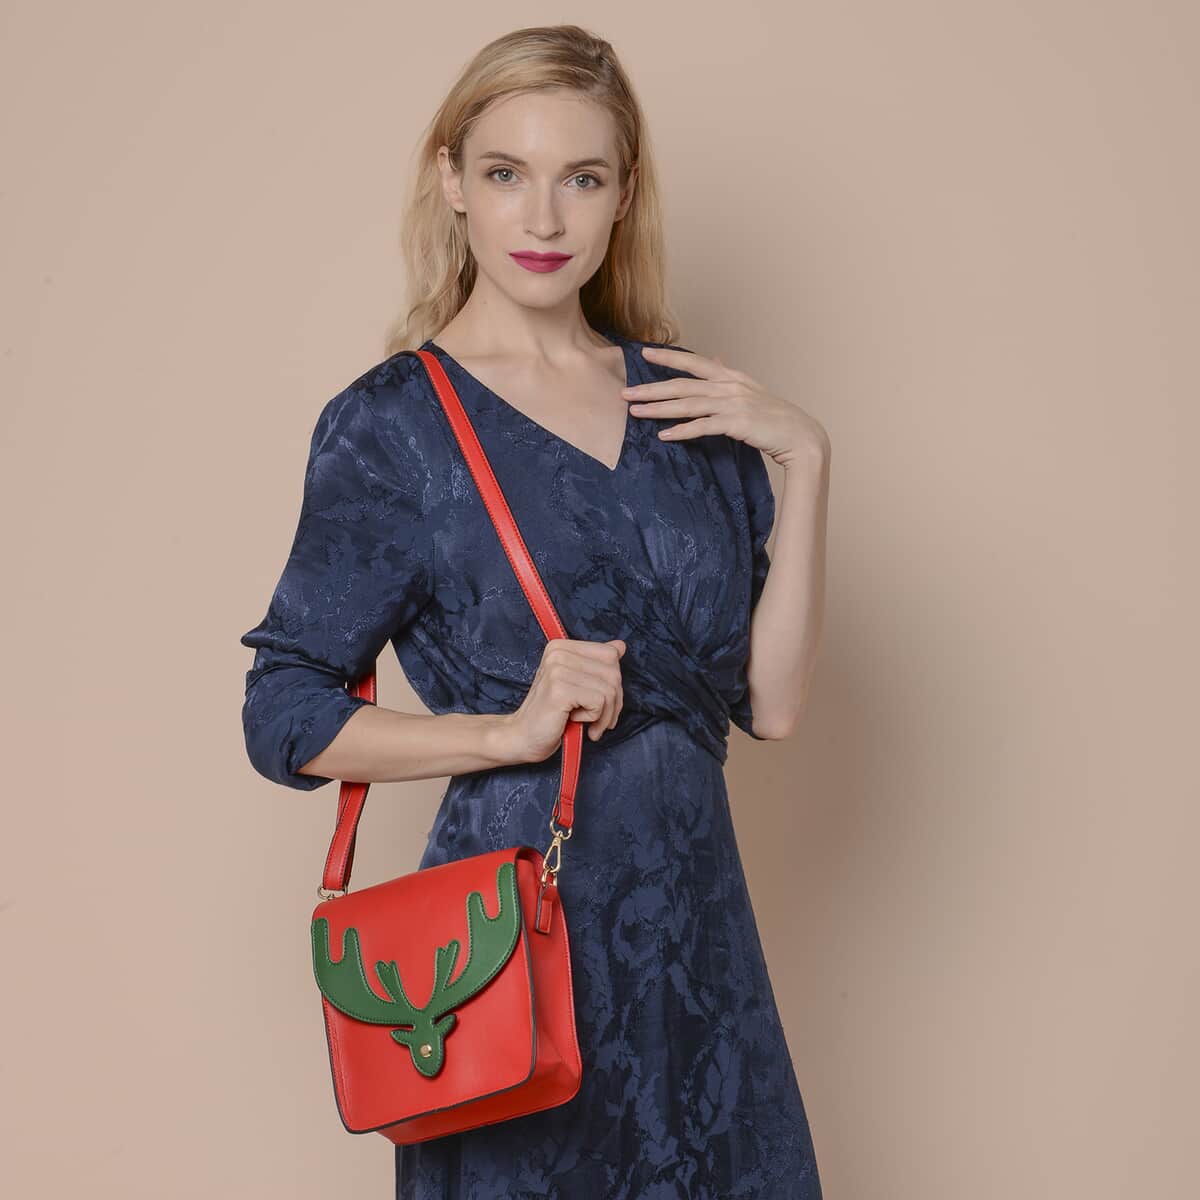 Red and Green Reindeer Antler Crossbody Bag with Detachable Shoulder Strap, Faux Leather Crossbody Bag for Women, Handbag, Perfect Pick for Christmas Party image number 1